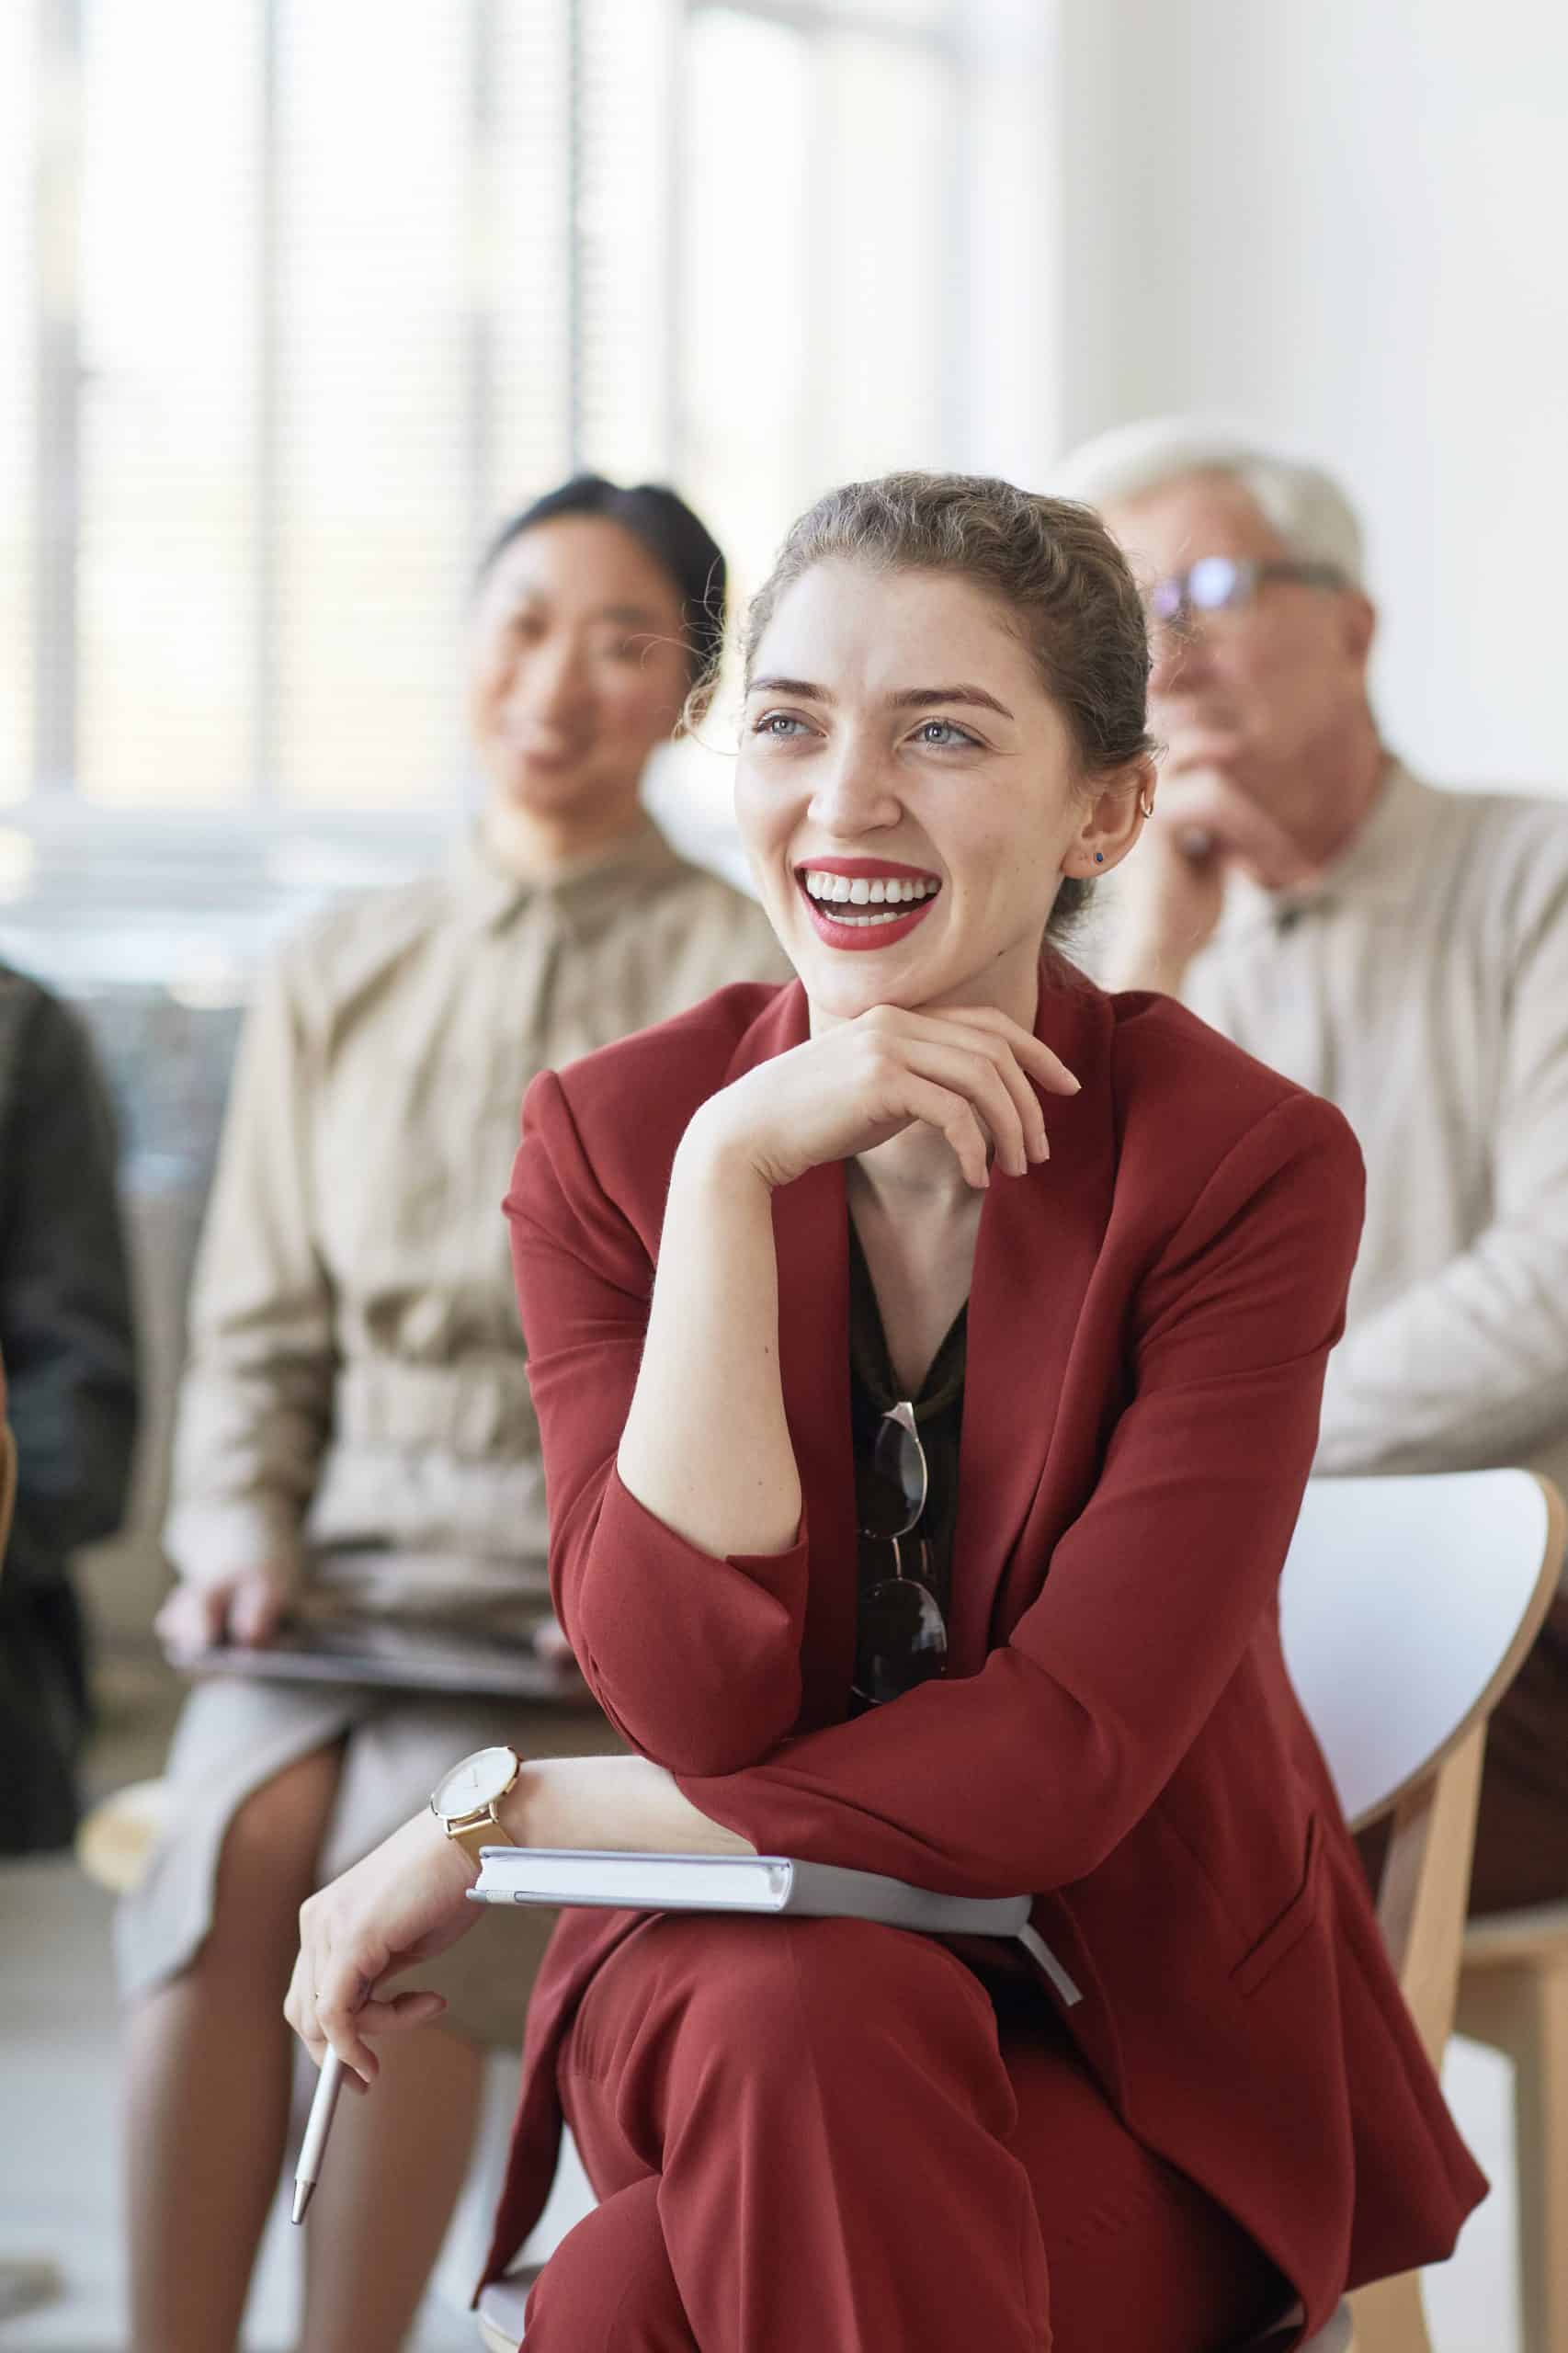 Diverse group of business people sitting on chairs in audience and listening at meeting or seminar, focus on young businesswoman smiling in foreground